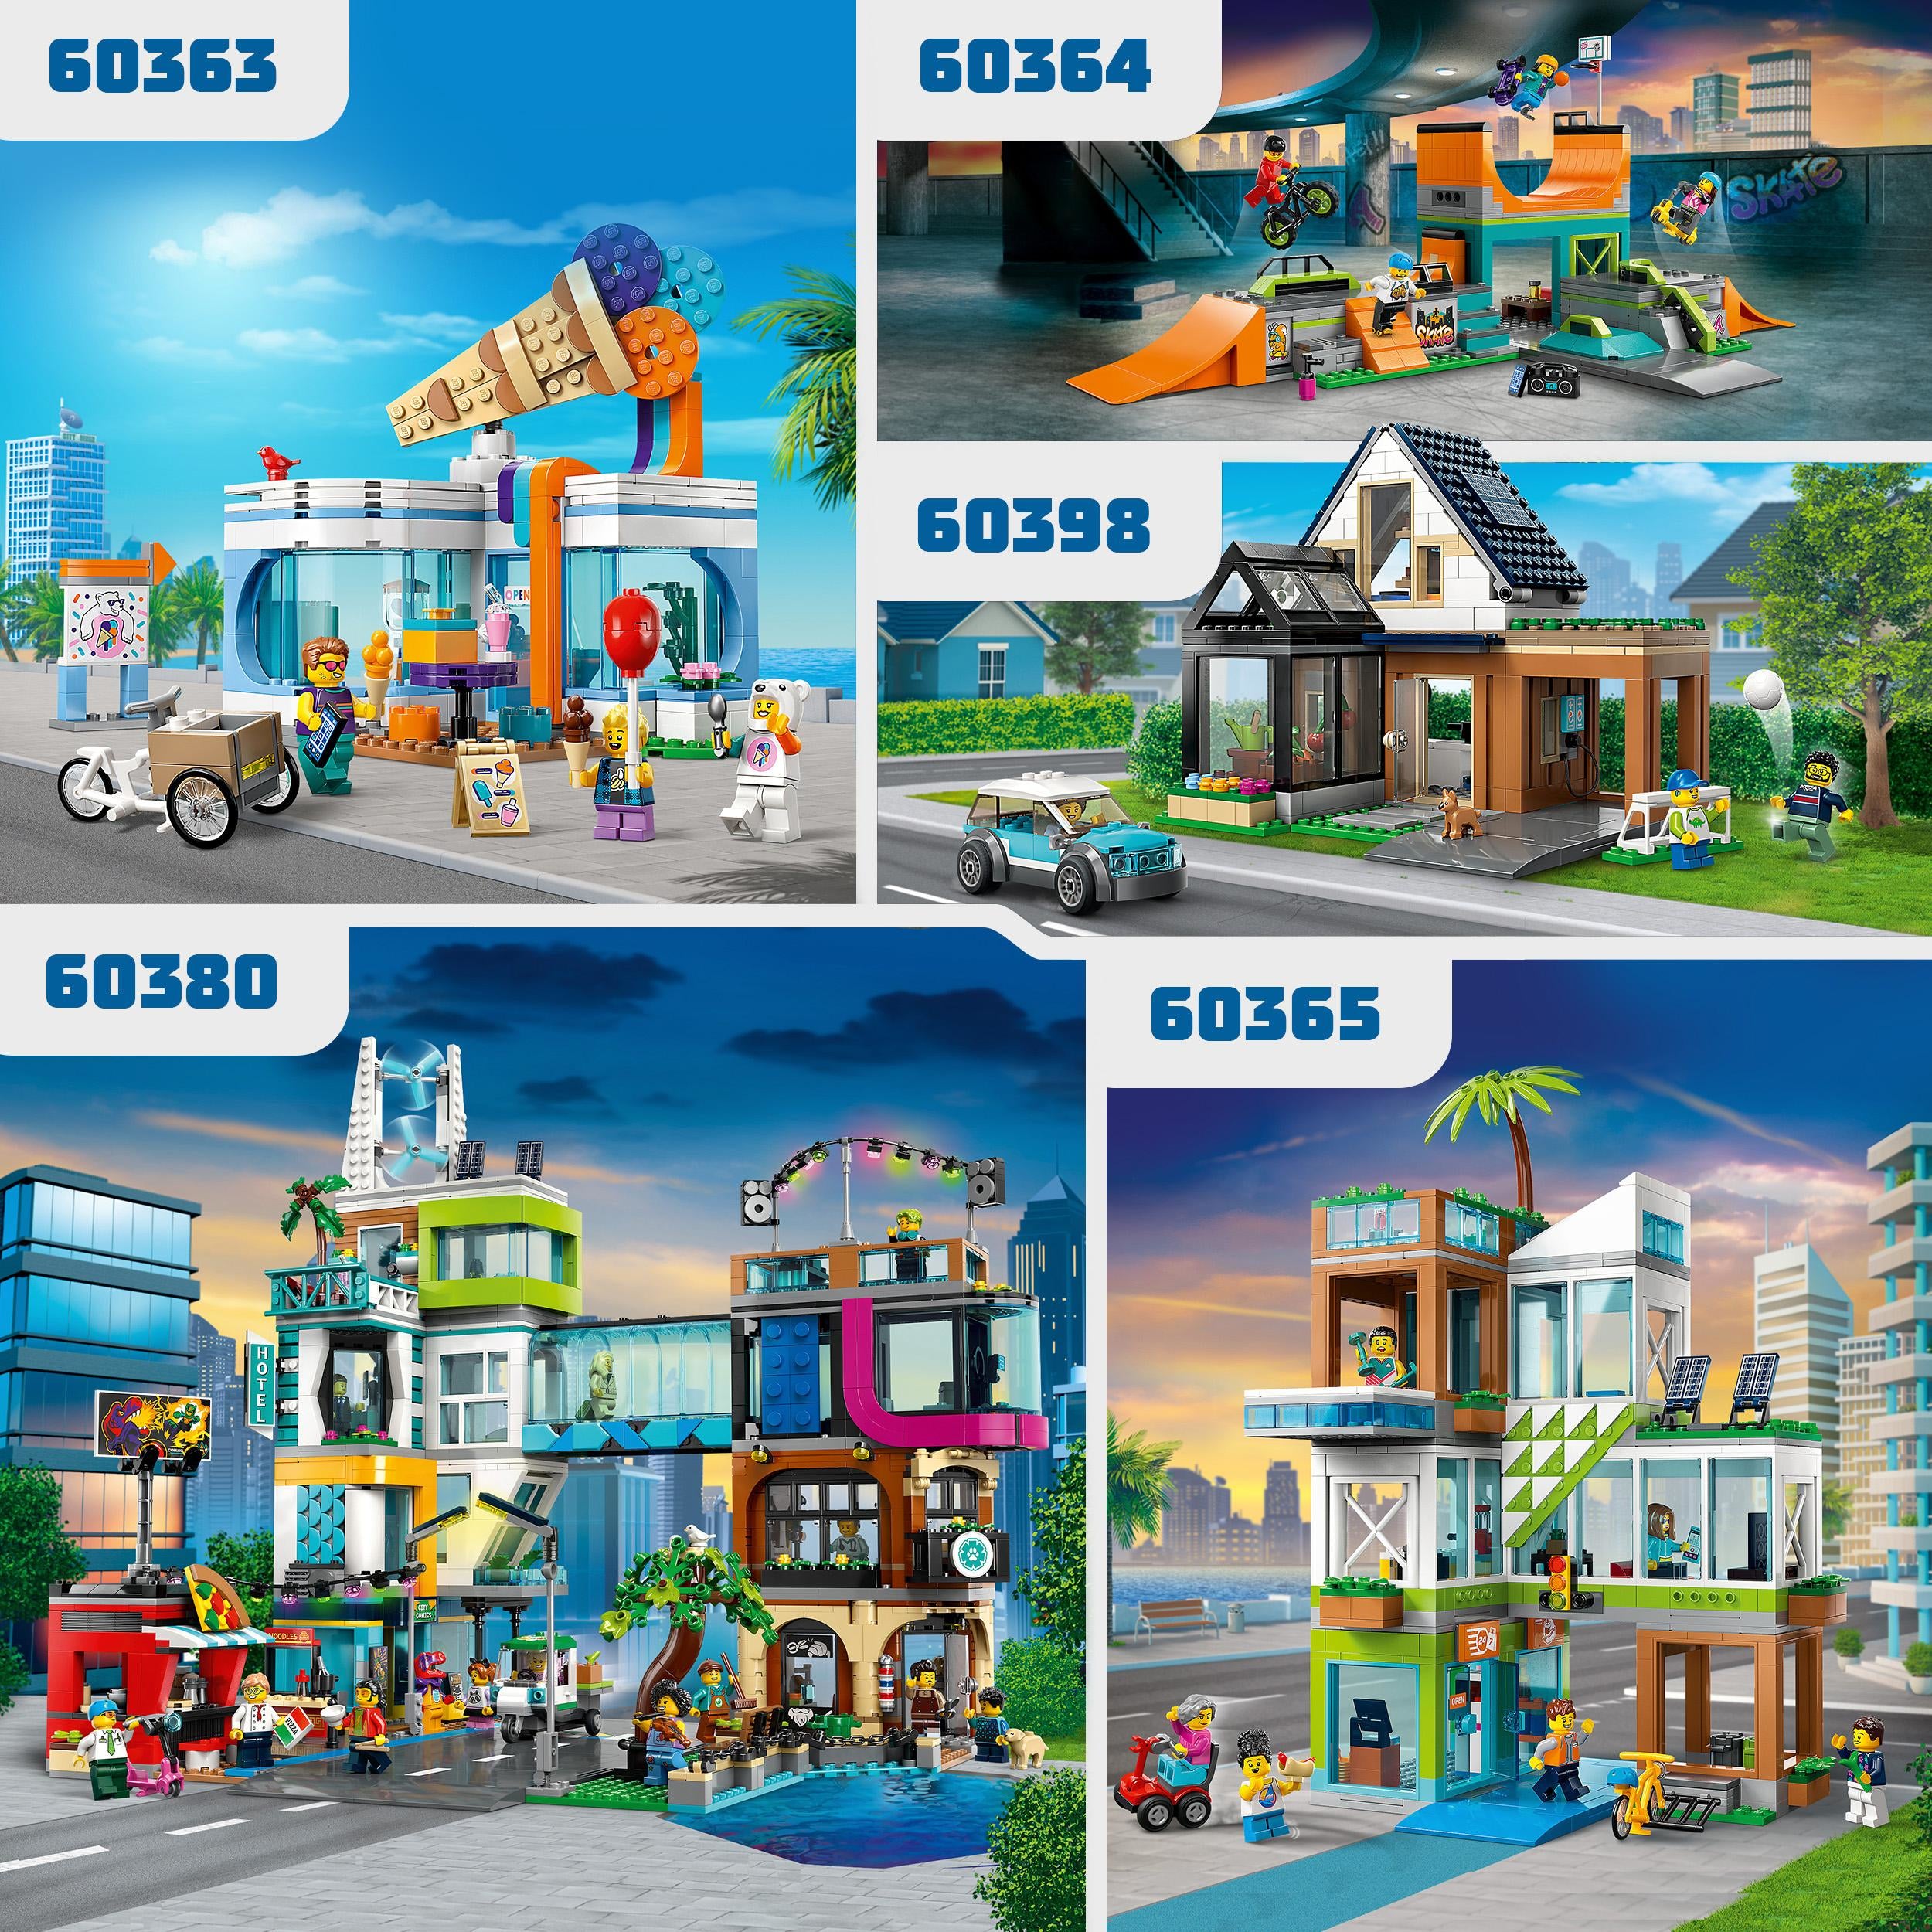 LEGO 60398 City Family House and Electric Car Set, Modern Dolls House Modular Building Model Kit with Toy Car, Minifigures and Puppy Figure, Toys for 6 Year Old Kids, Boys, Girls